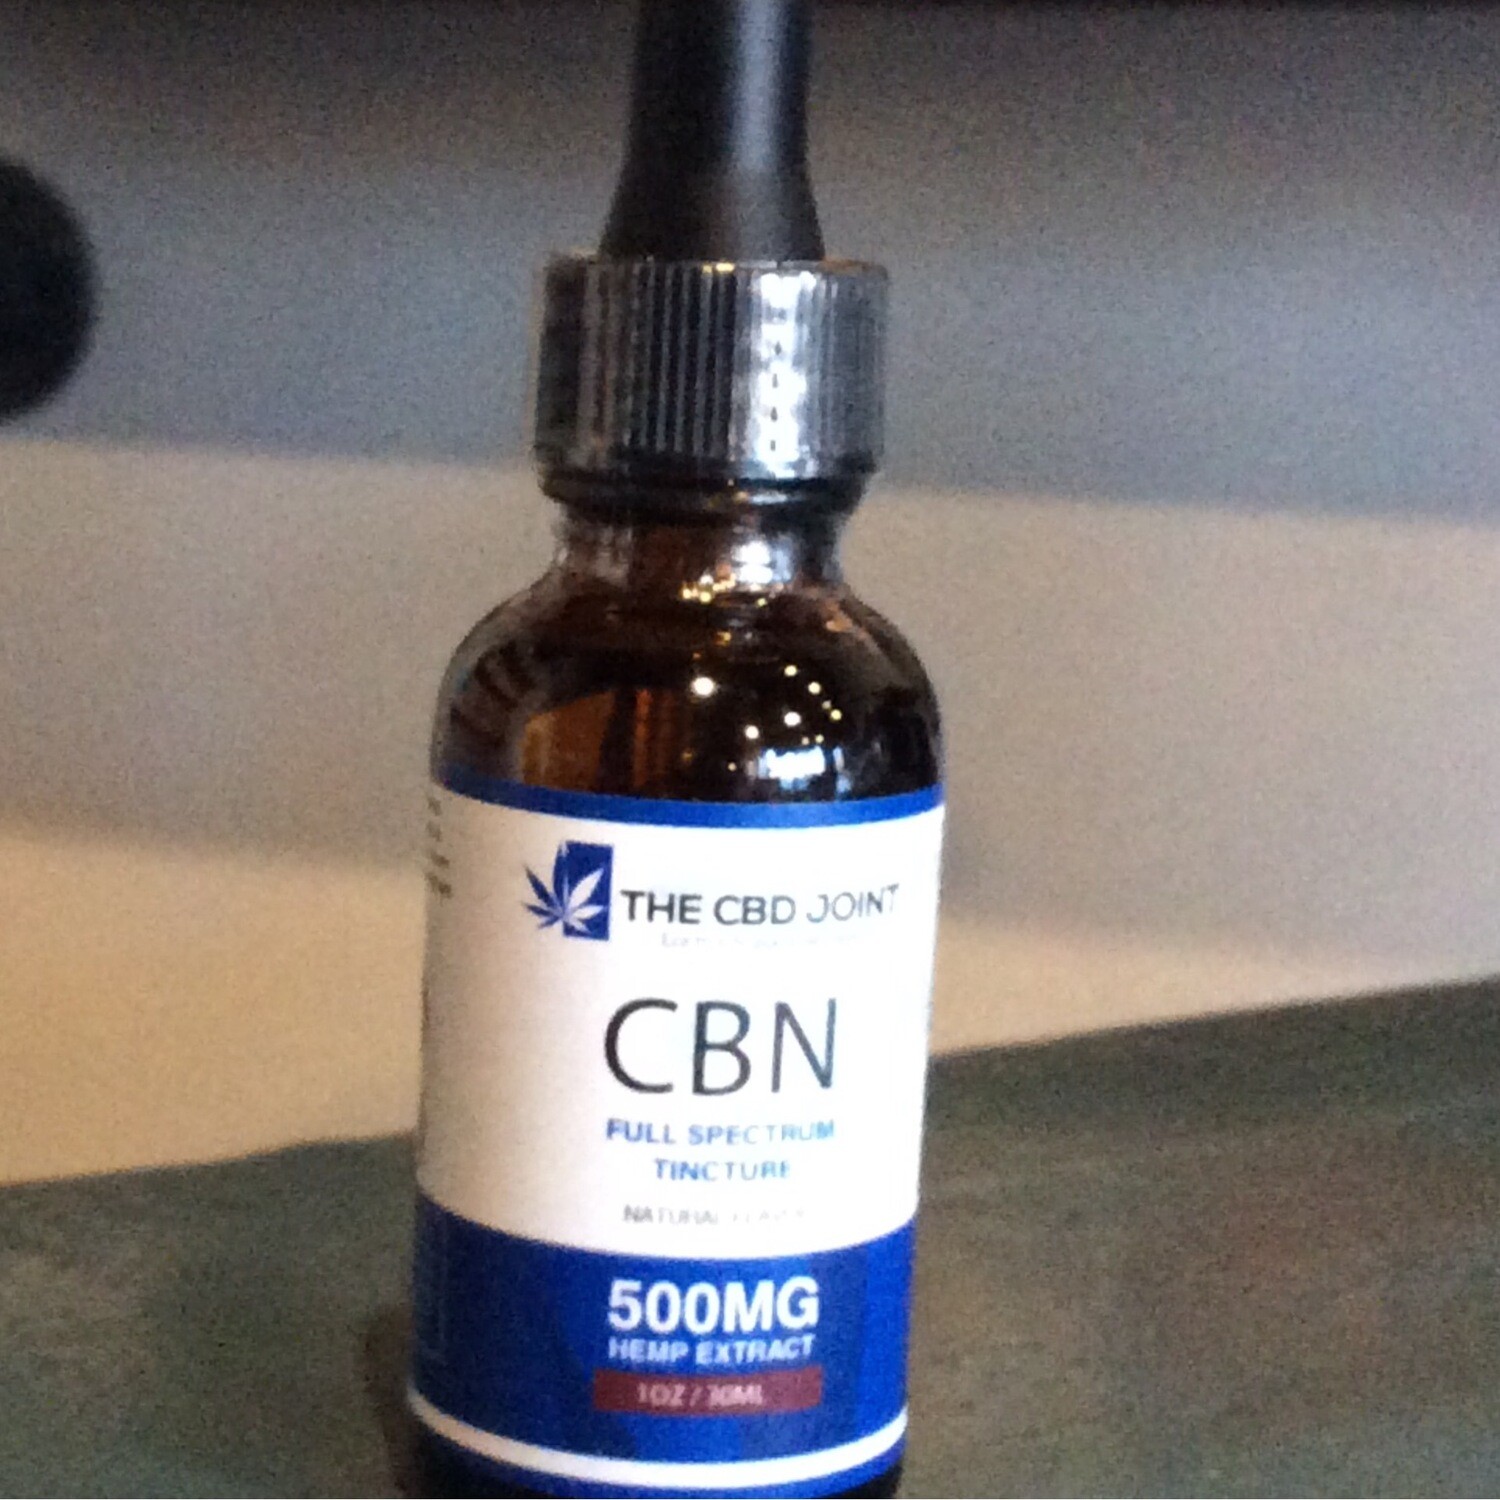 The CBD Joint's CBN  Tincture (500MG)